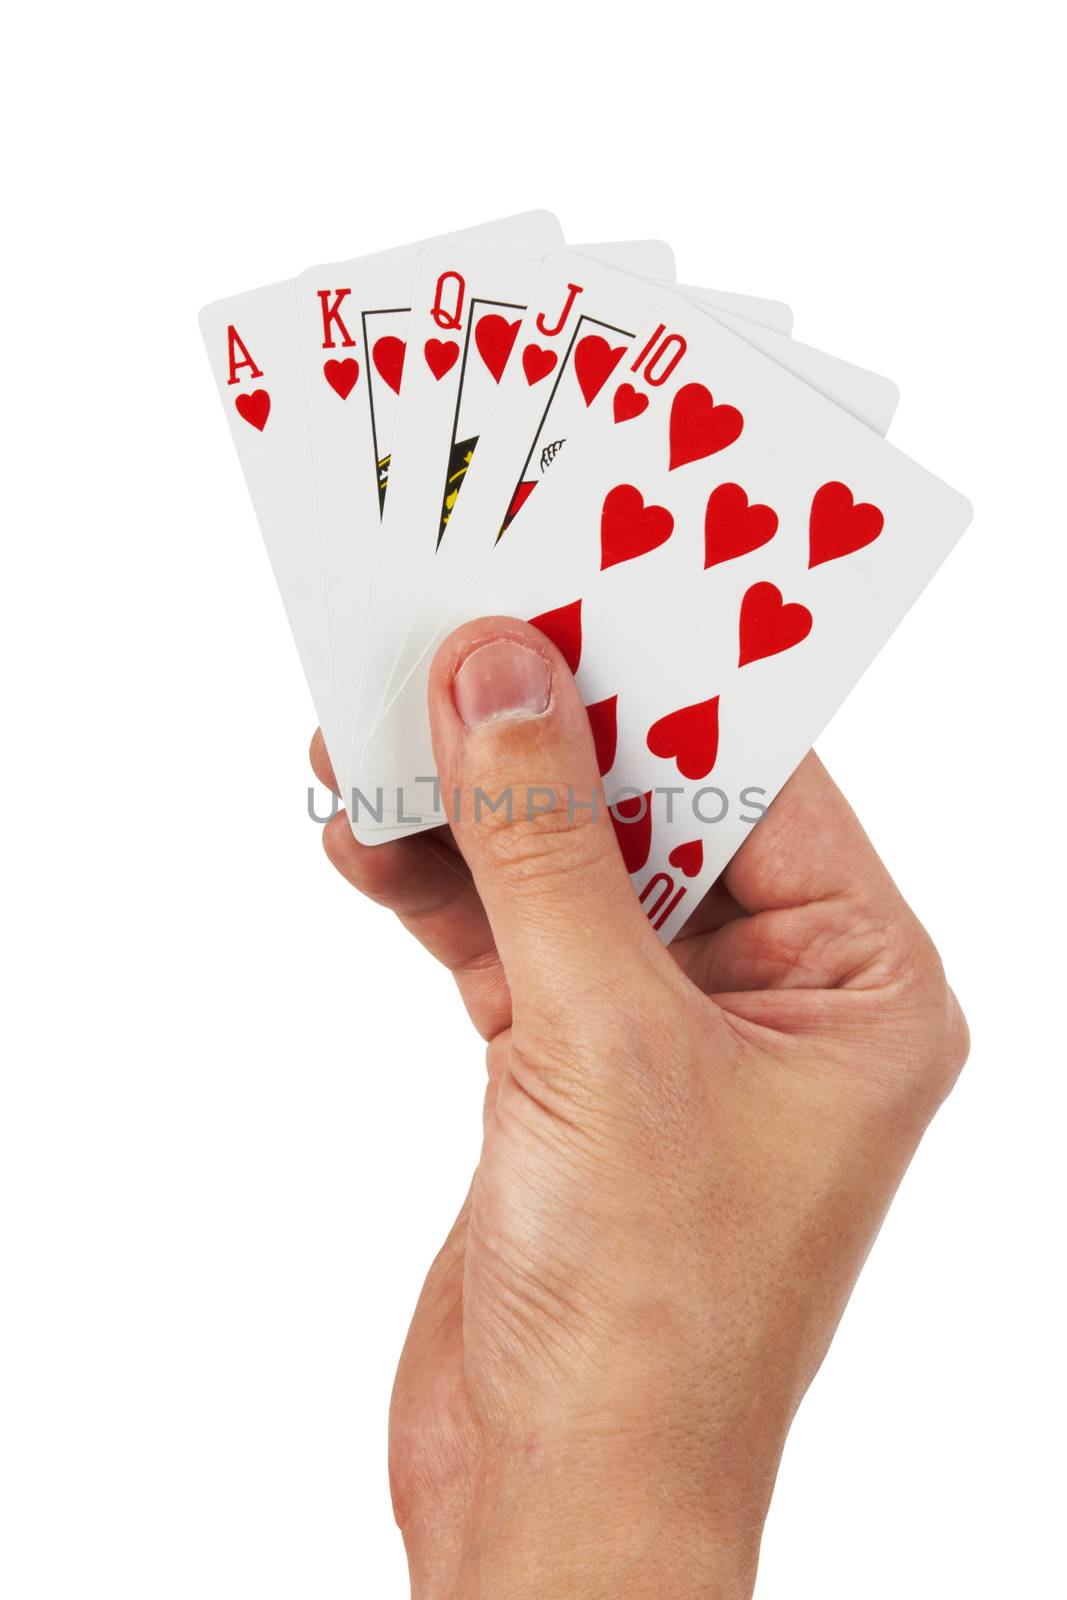 Playing cards in hand isolated on white background 